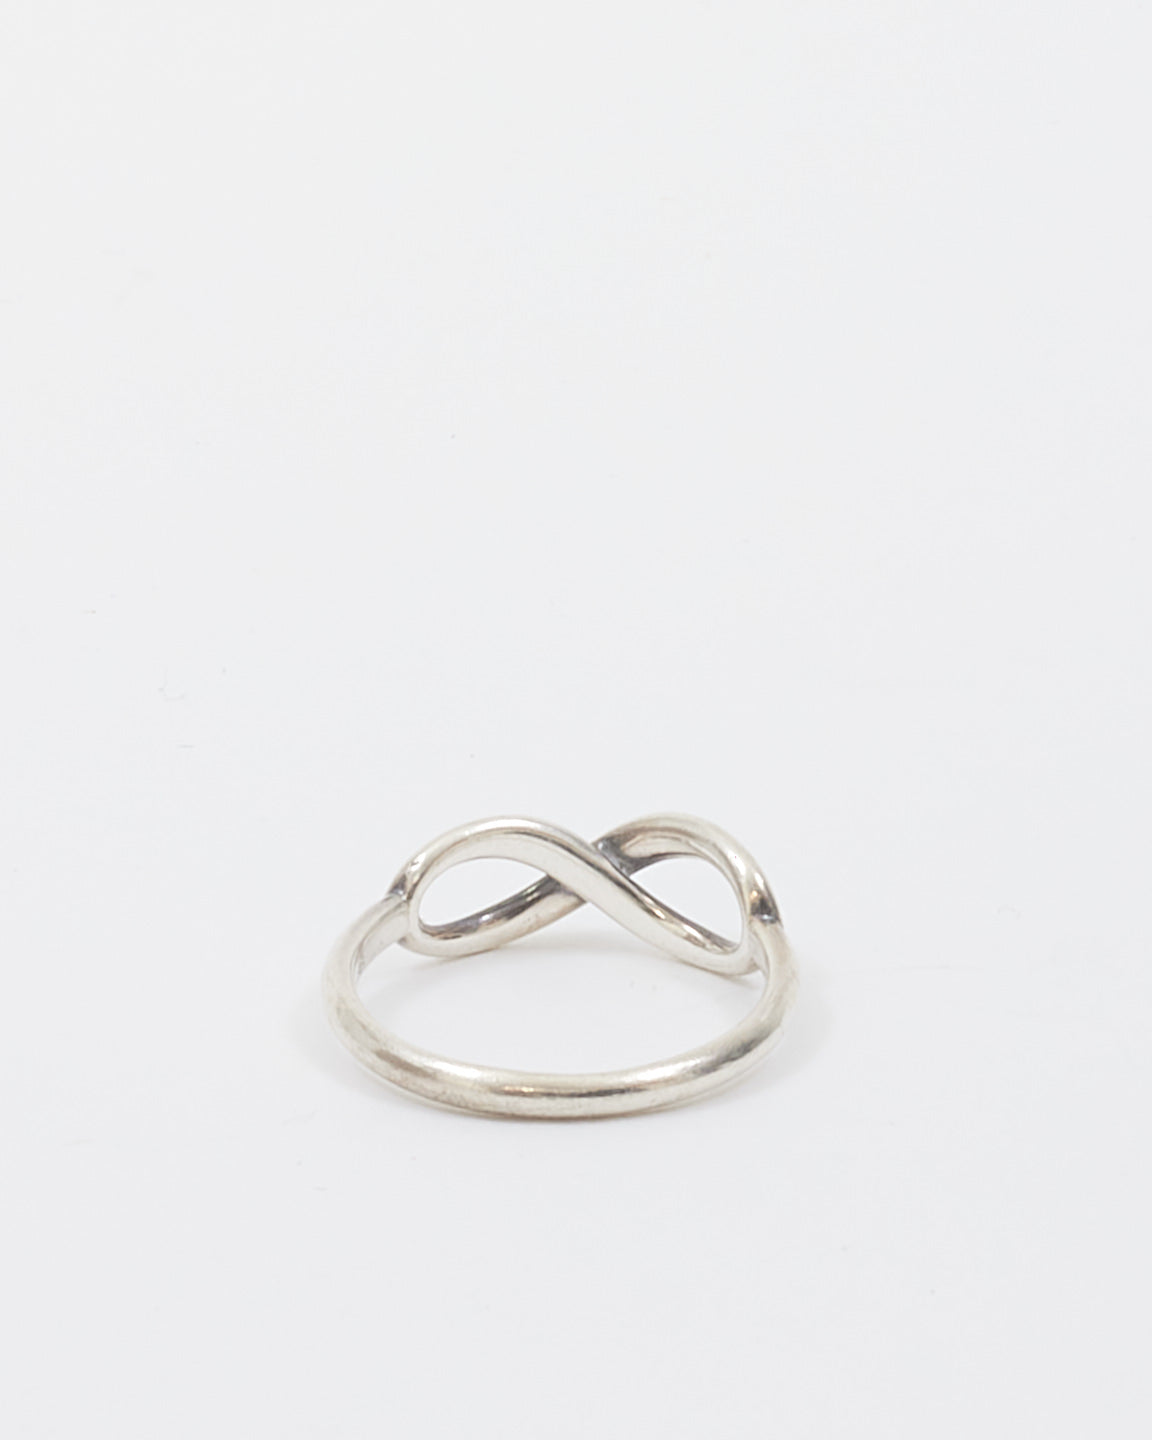 Tiffany & Co. Sterling Silver Infinity Ring - 8